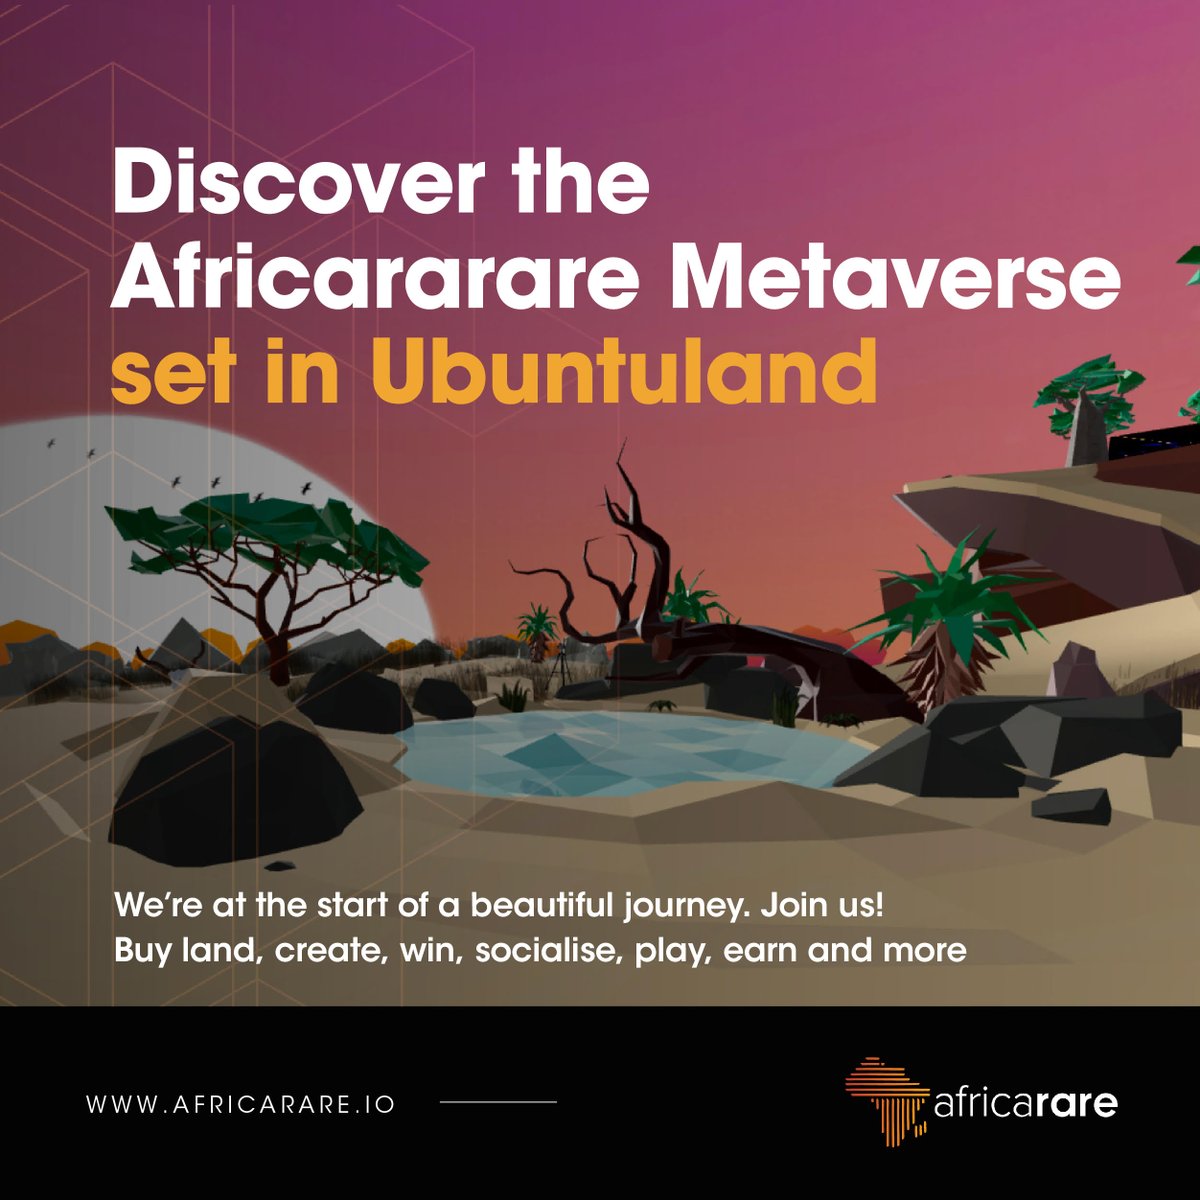 We are on a beautiful journey, more updates and launches will be announced in the coming weeks.

#africarare #ubuntuland #partnerships #futureproofafrica #earlysettler